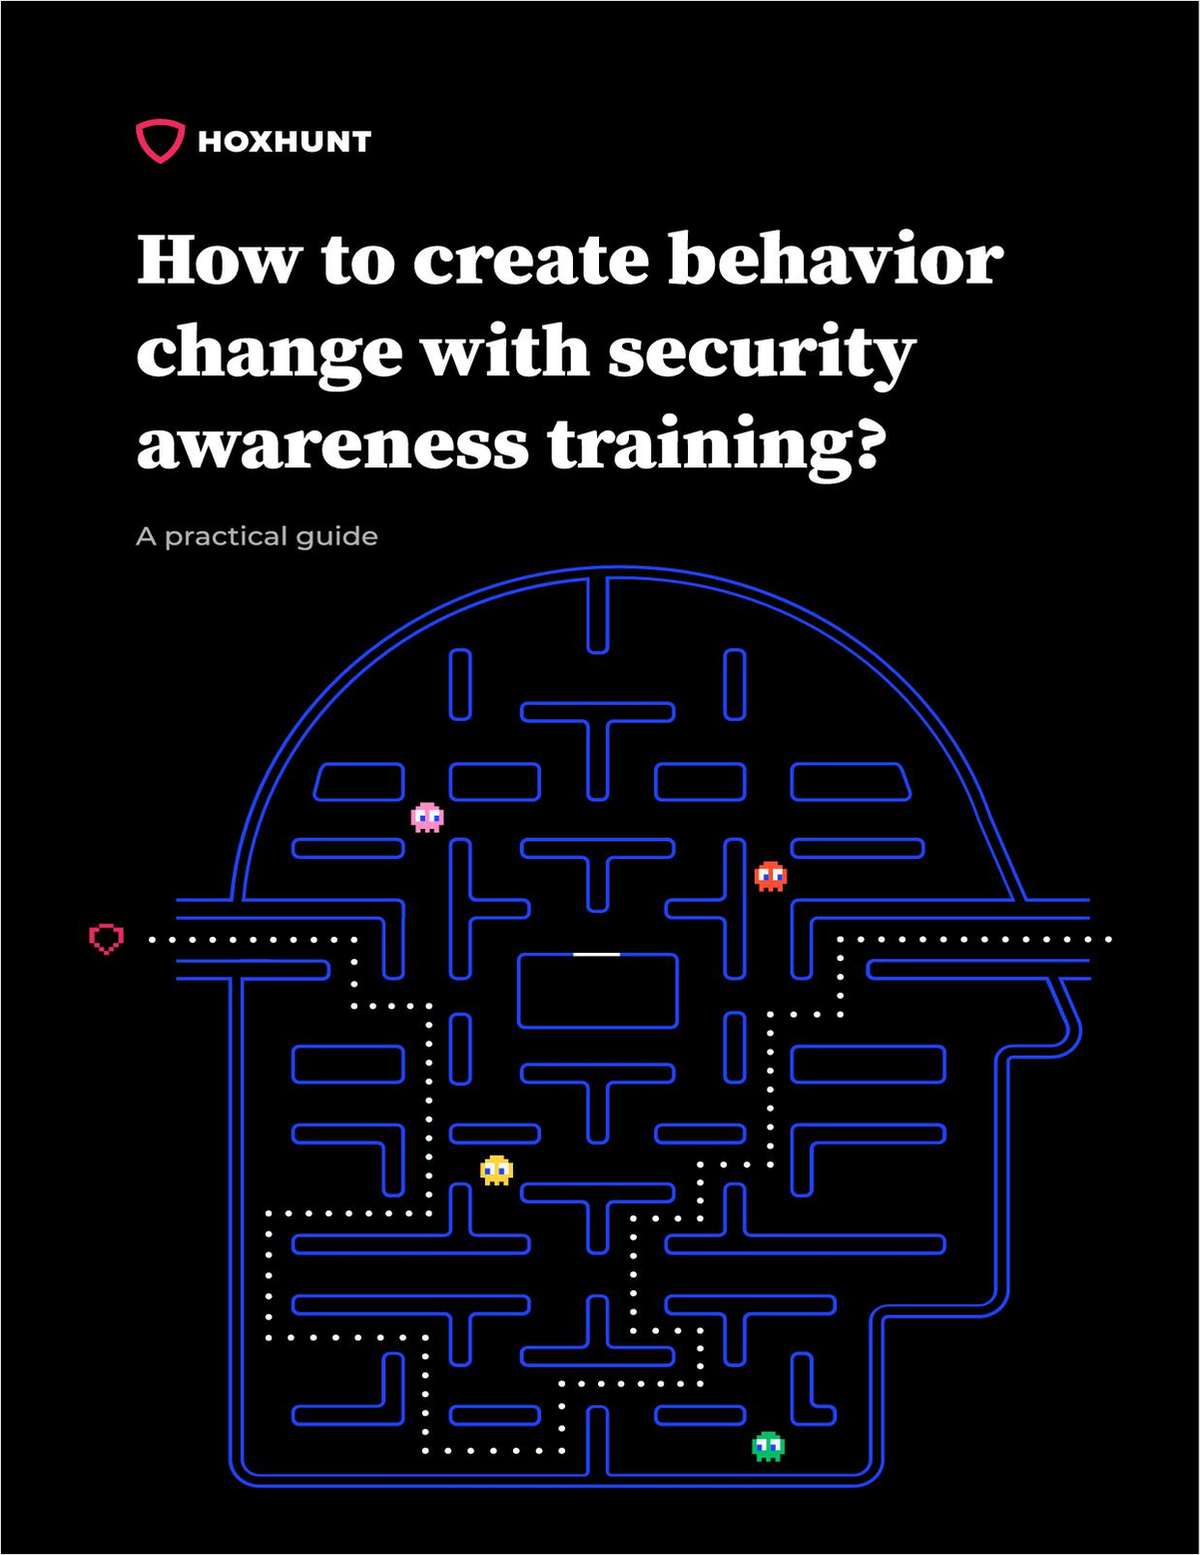 How To Create Behavior Change With Security Awareness Training?